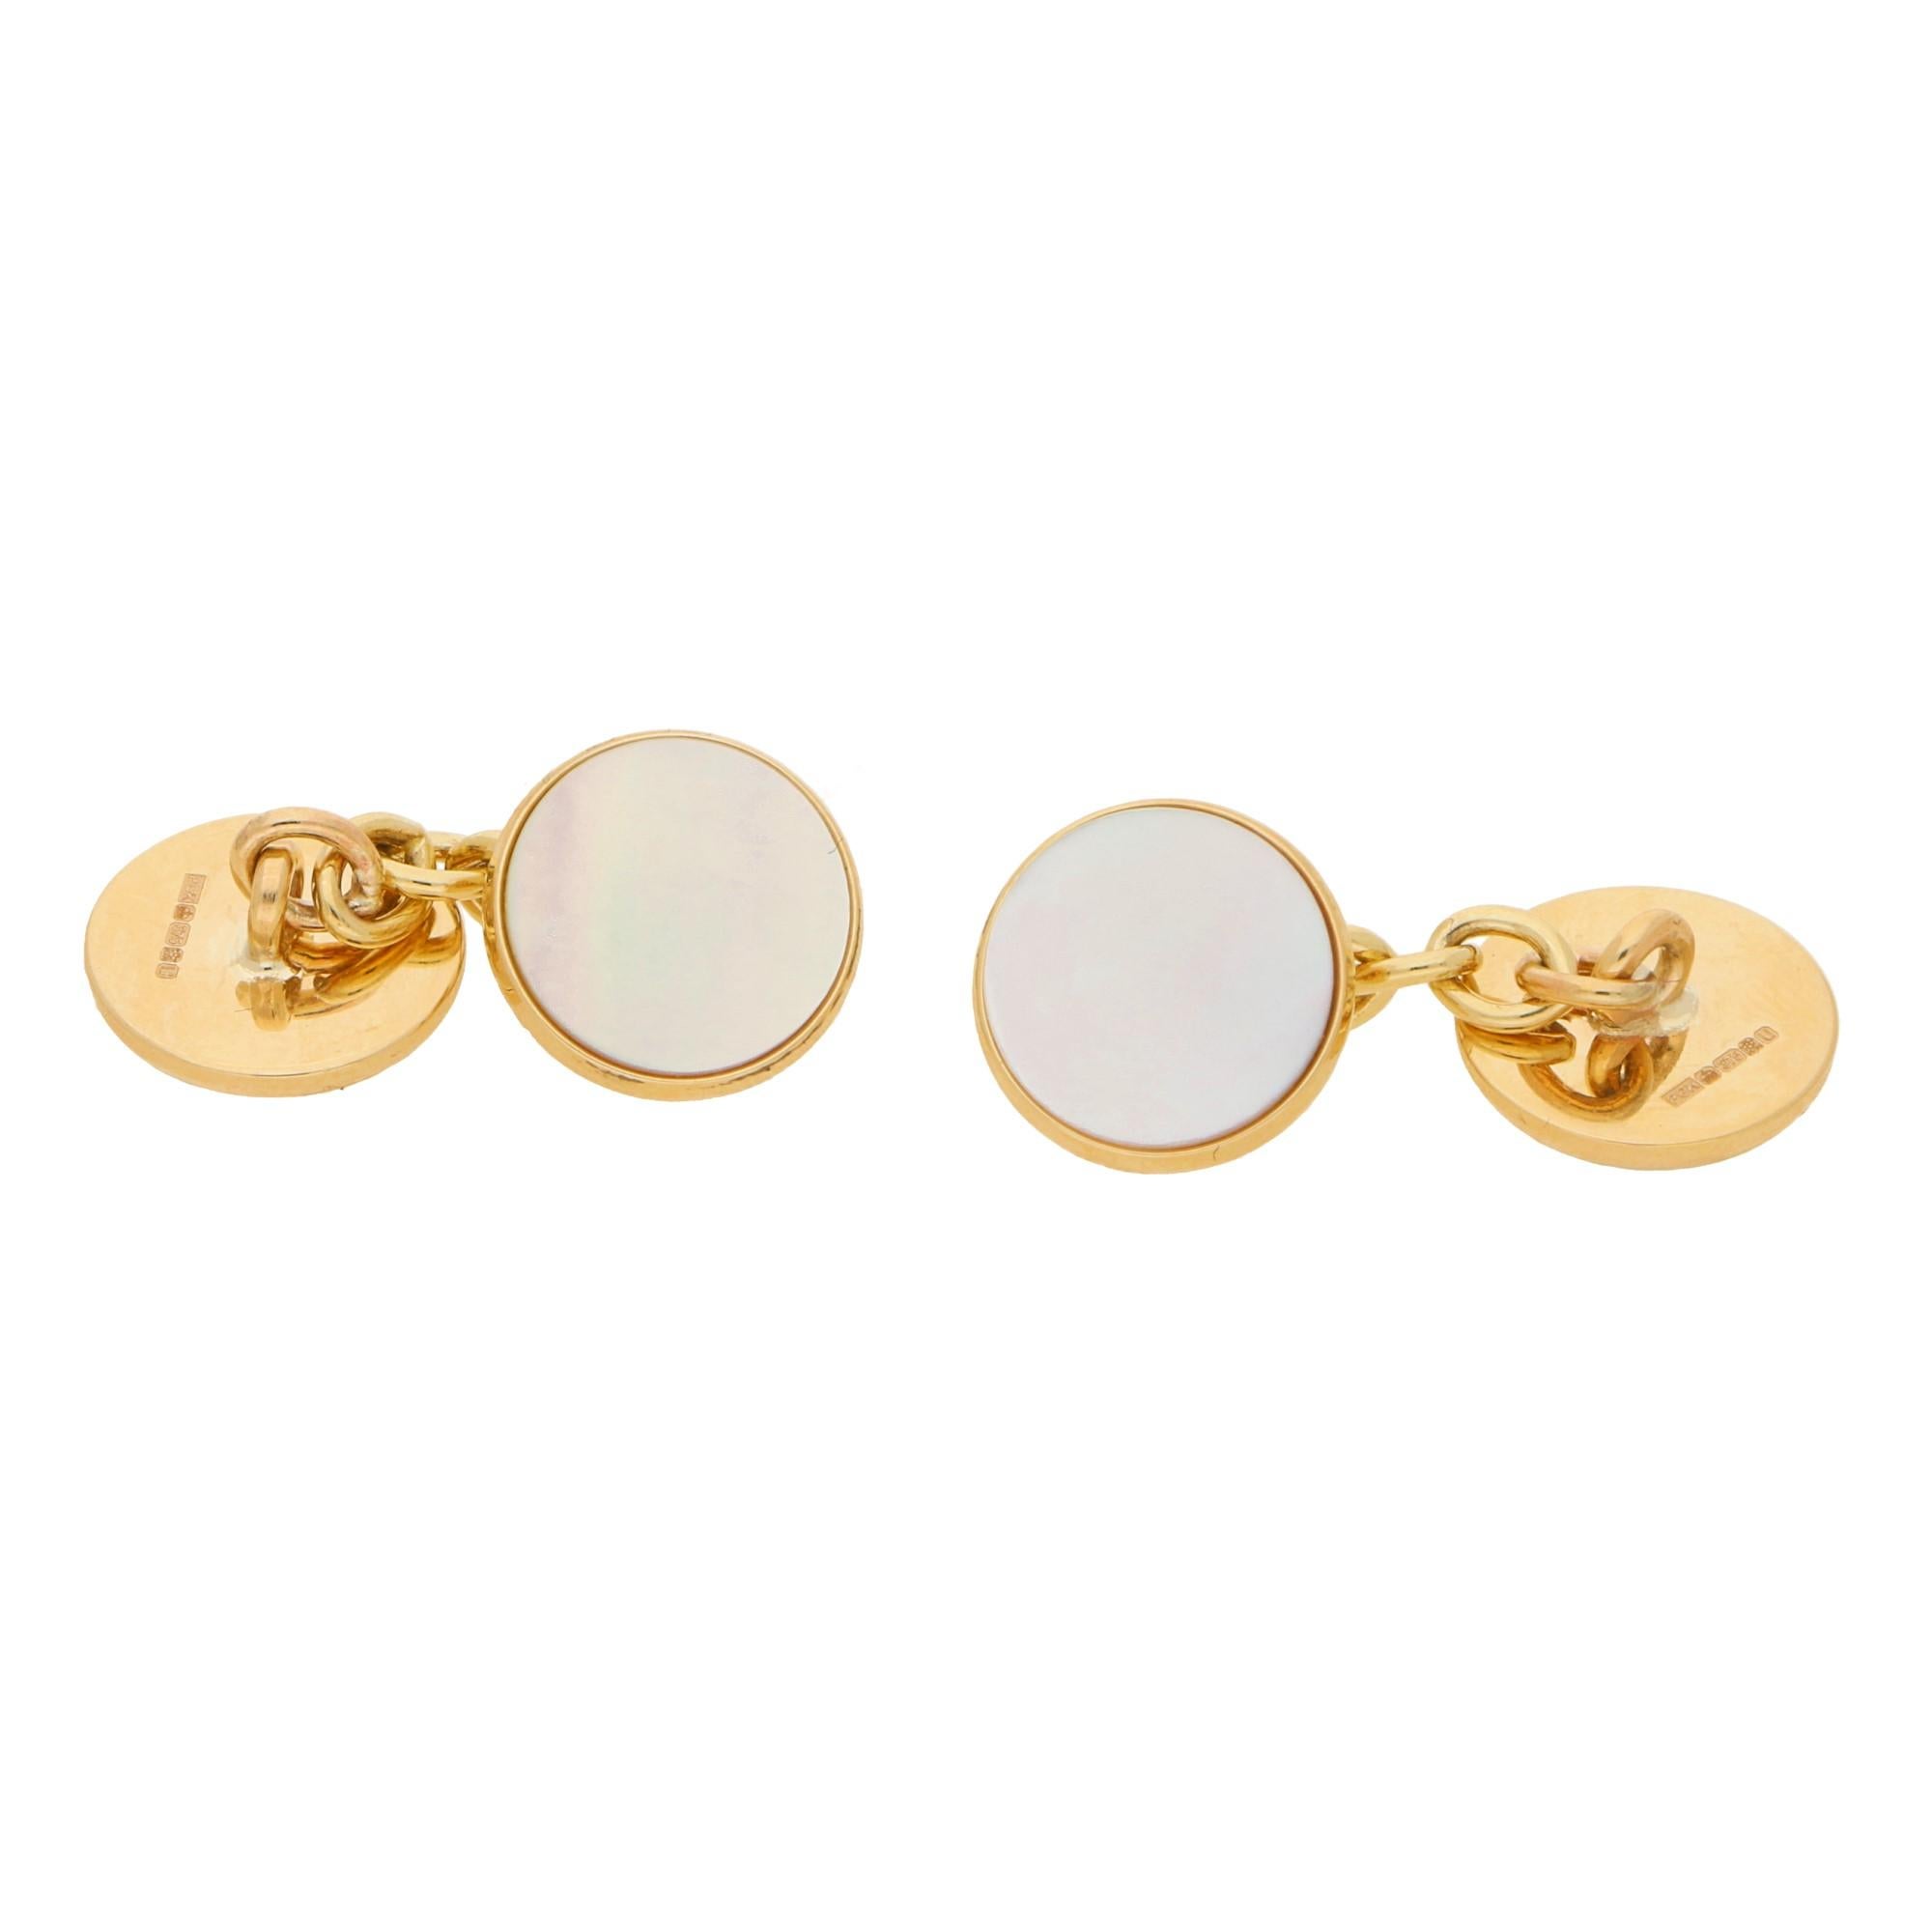 A stylish pair of mother of pearl round chain cufflinks set in 9k yellow gold. 

Each cufflink solely features and single piece of lustrous white mother of pearl. The mother of pearl is set on-top of a solid 9k yellow gold disc which is connected to